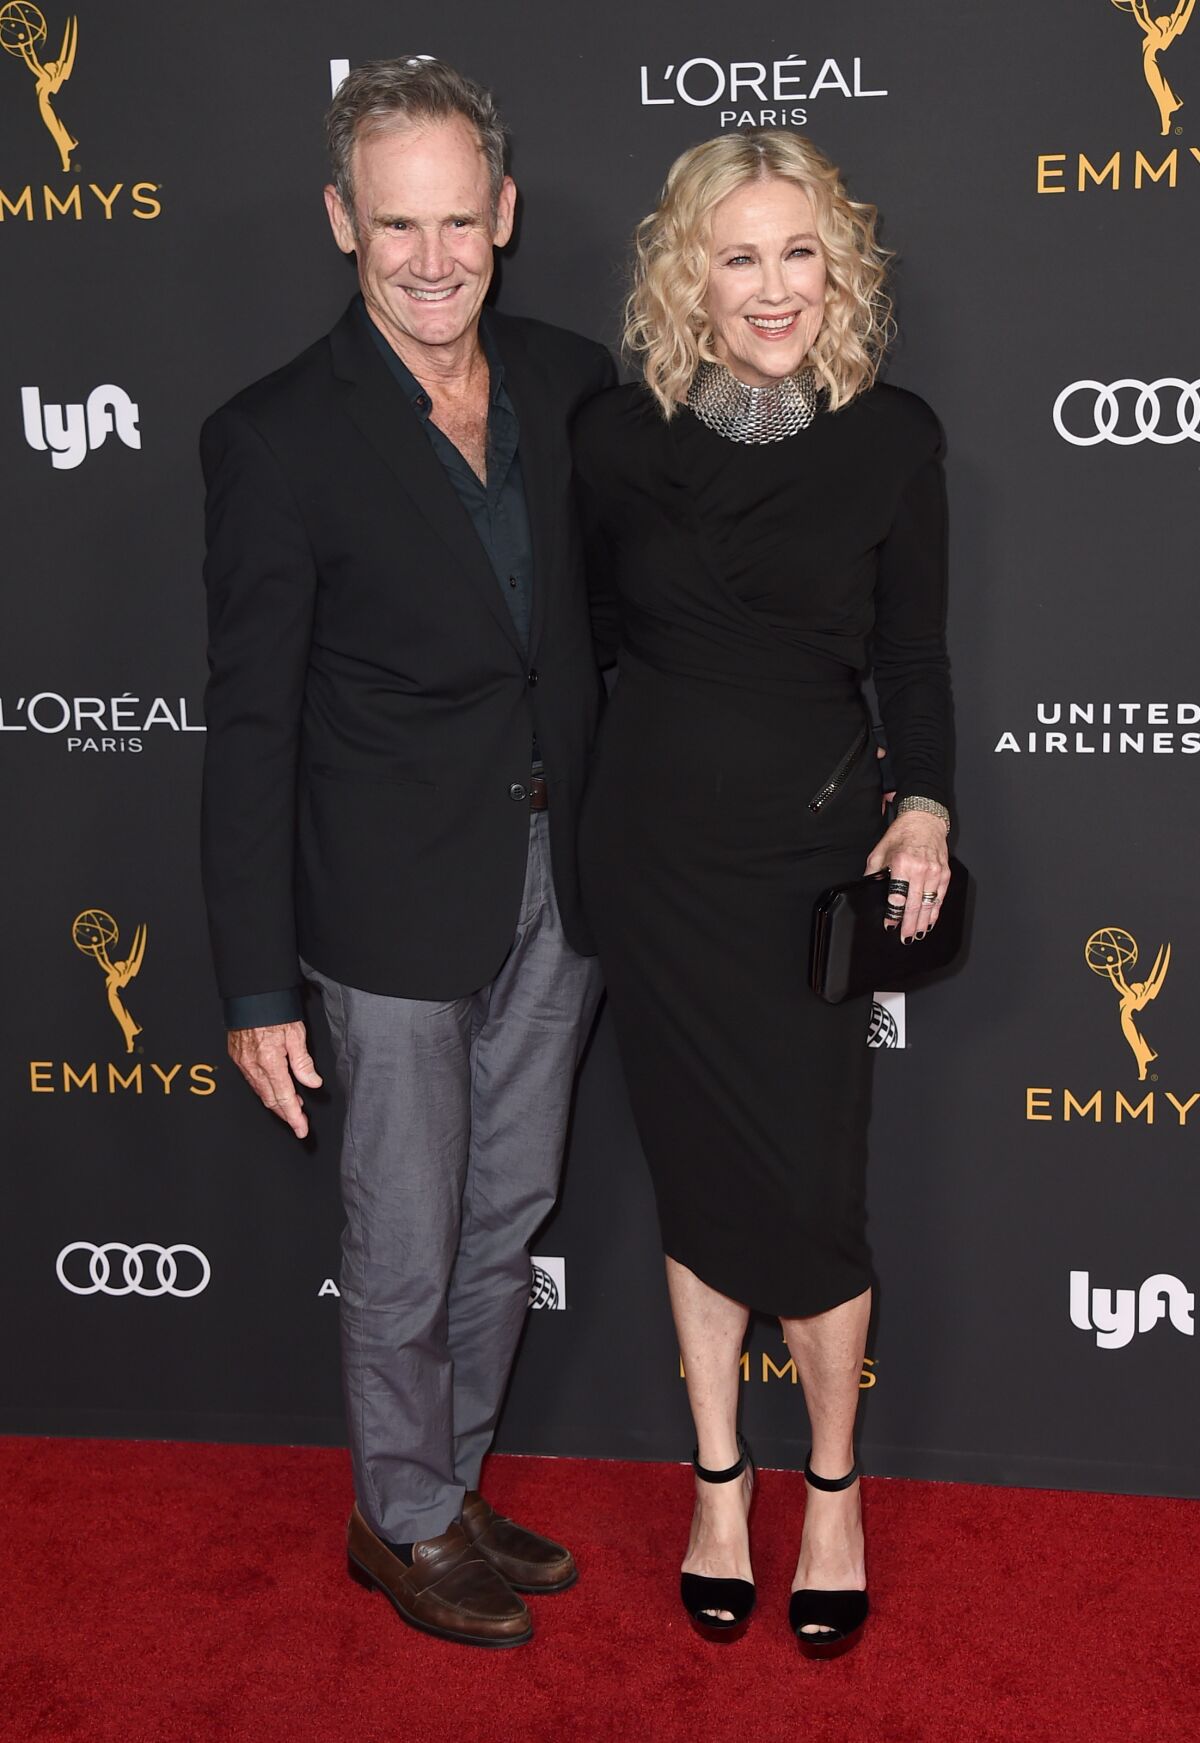 Bo Welch and Catherine O'Hara, an Emmy nominee for "Schitt's Creek," at the 2019 Performers Nominee Reception.